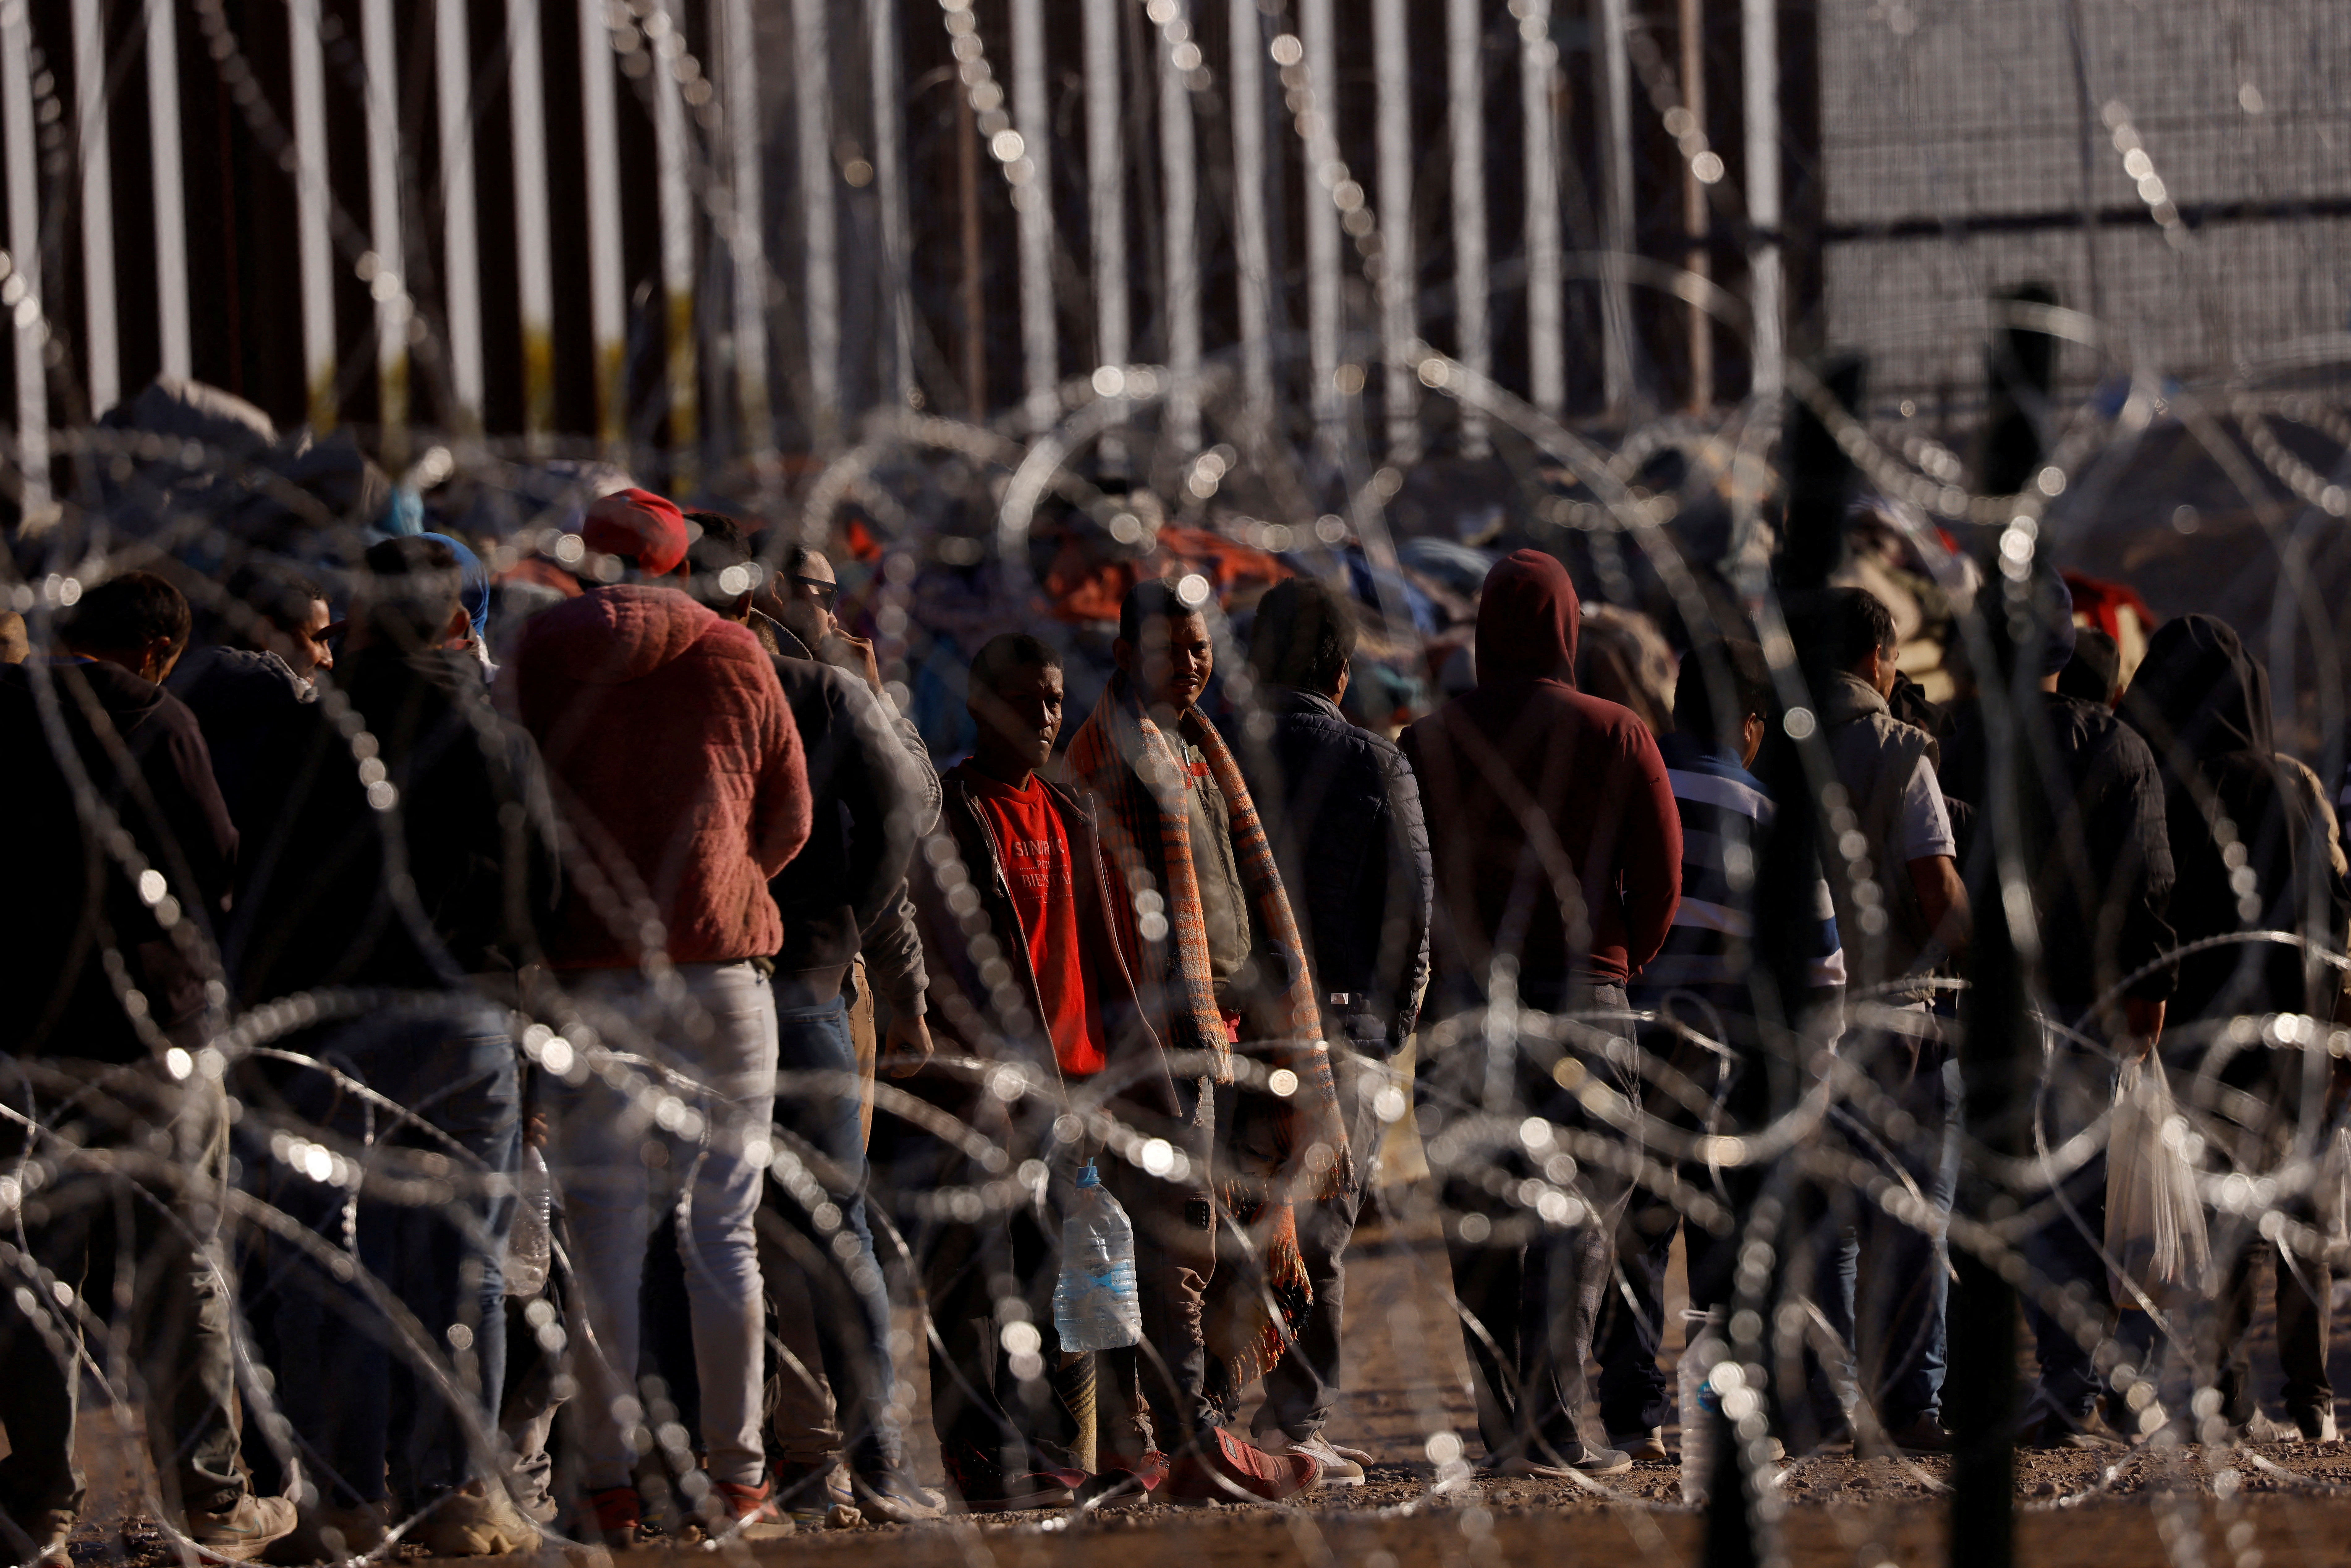 Migrants gather along the U.S. Mexico border after the lifting of Tile 42